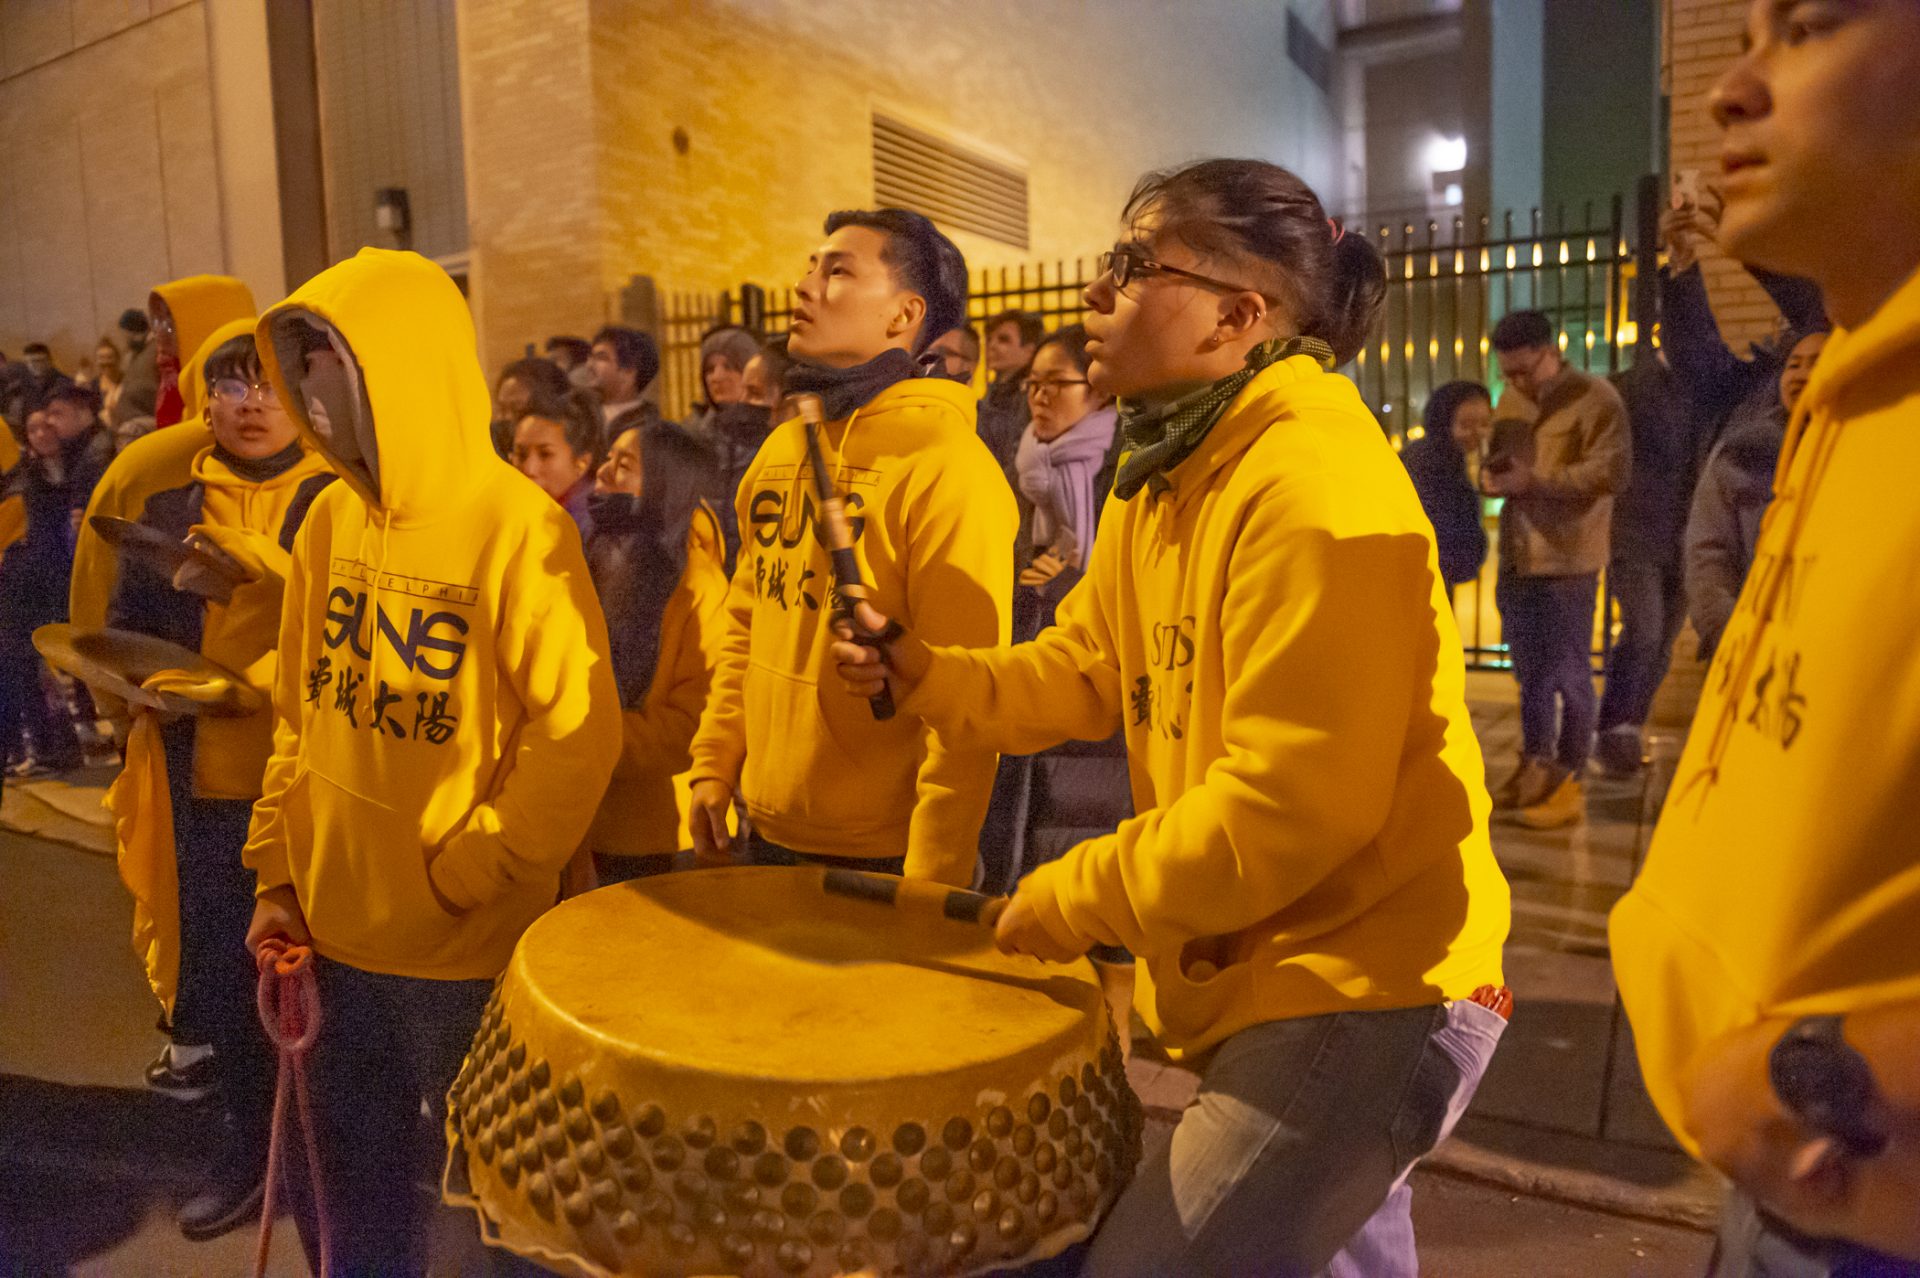 Philadelphia Sun's percussionist beat out the rythym that the lion dancers perform to.